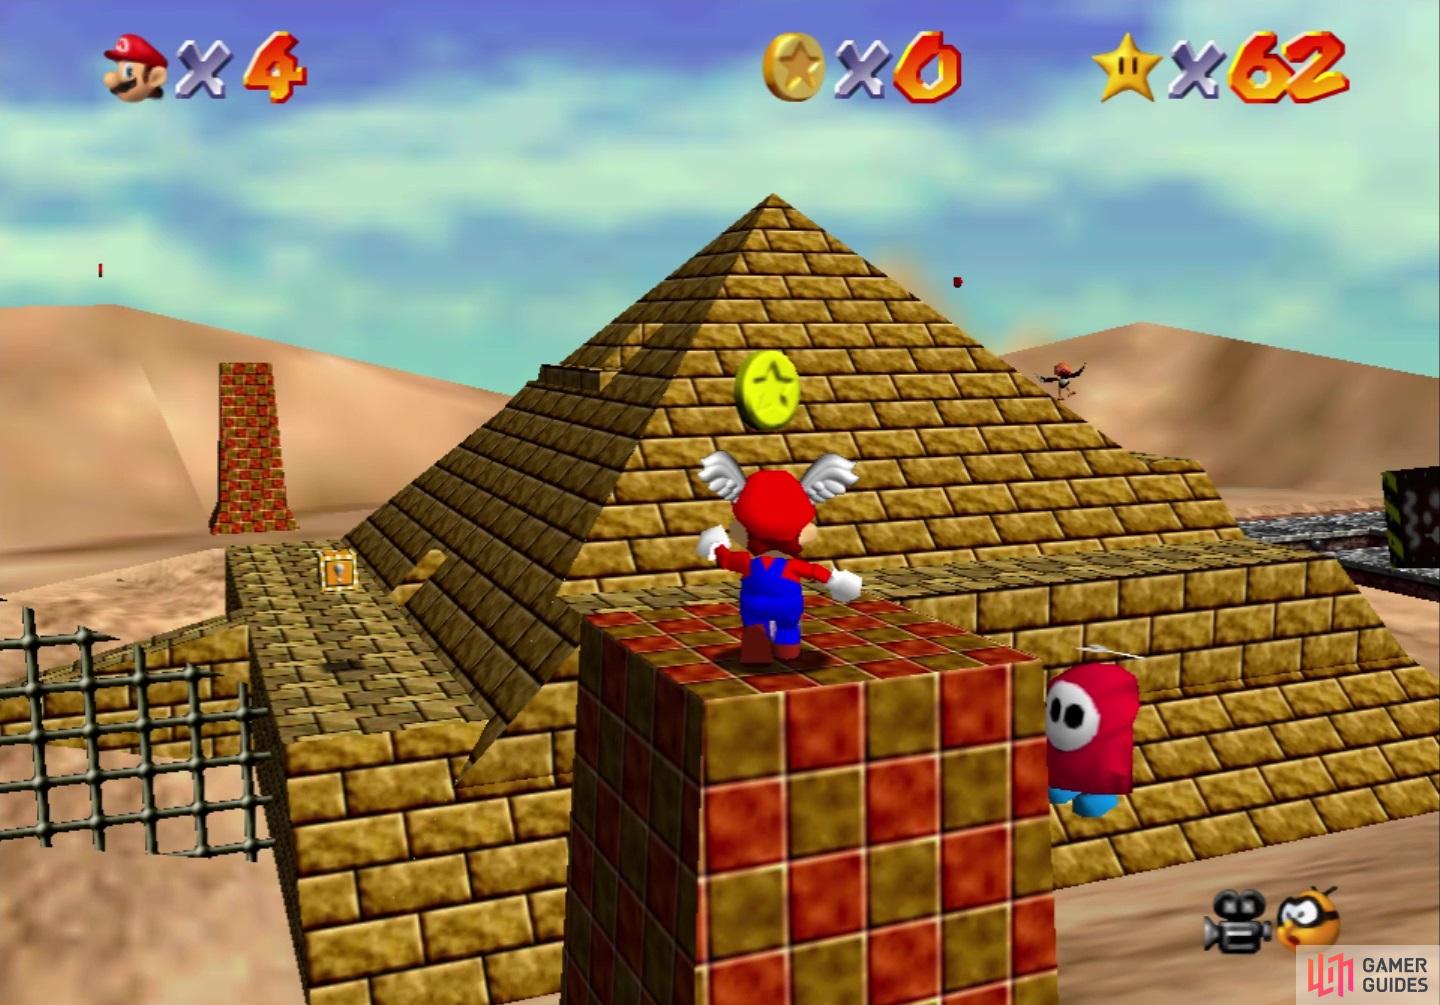 Super mario 64 walkthrough stand tall on four pillars of investing spread betting cfd trading difference between dementia